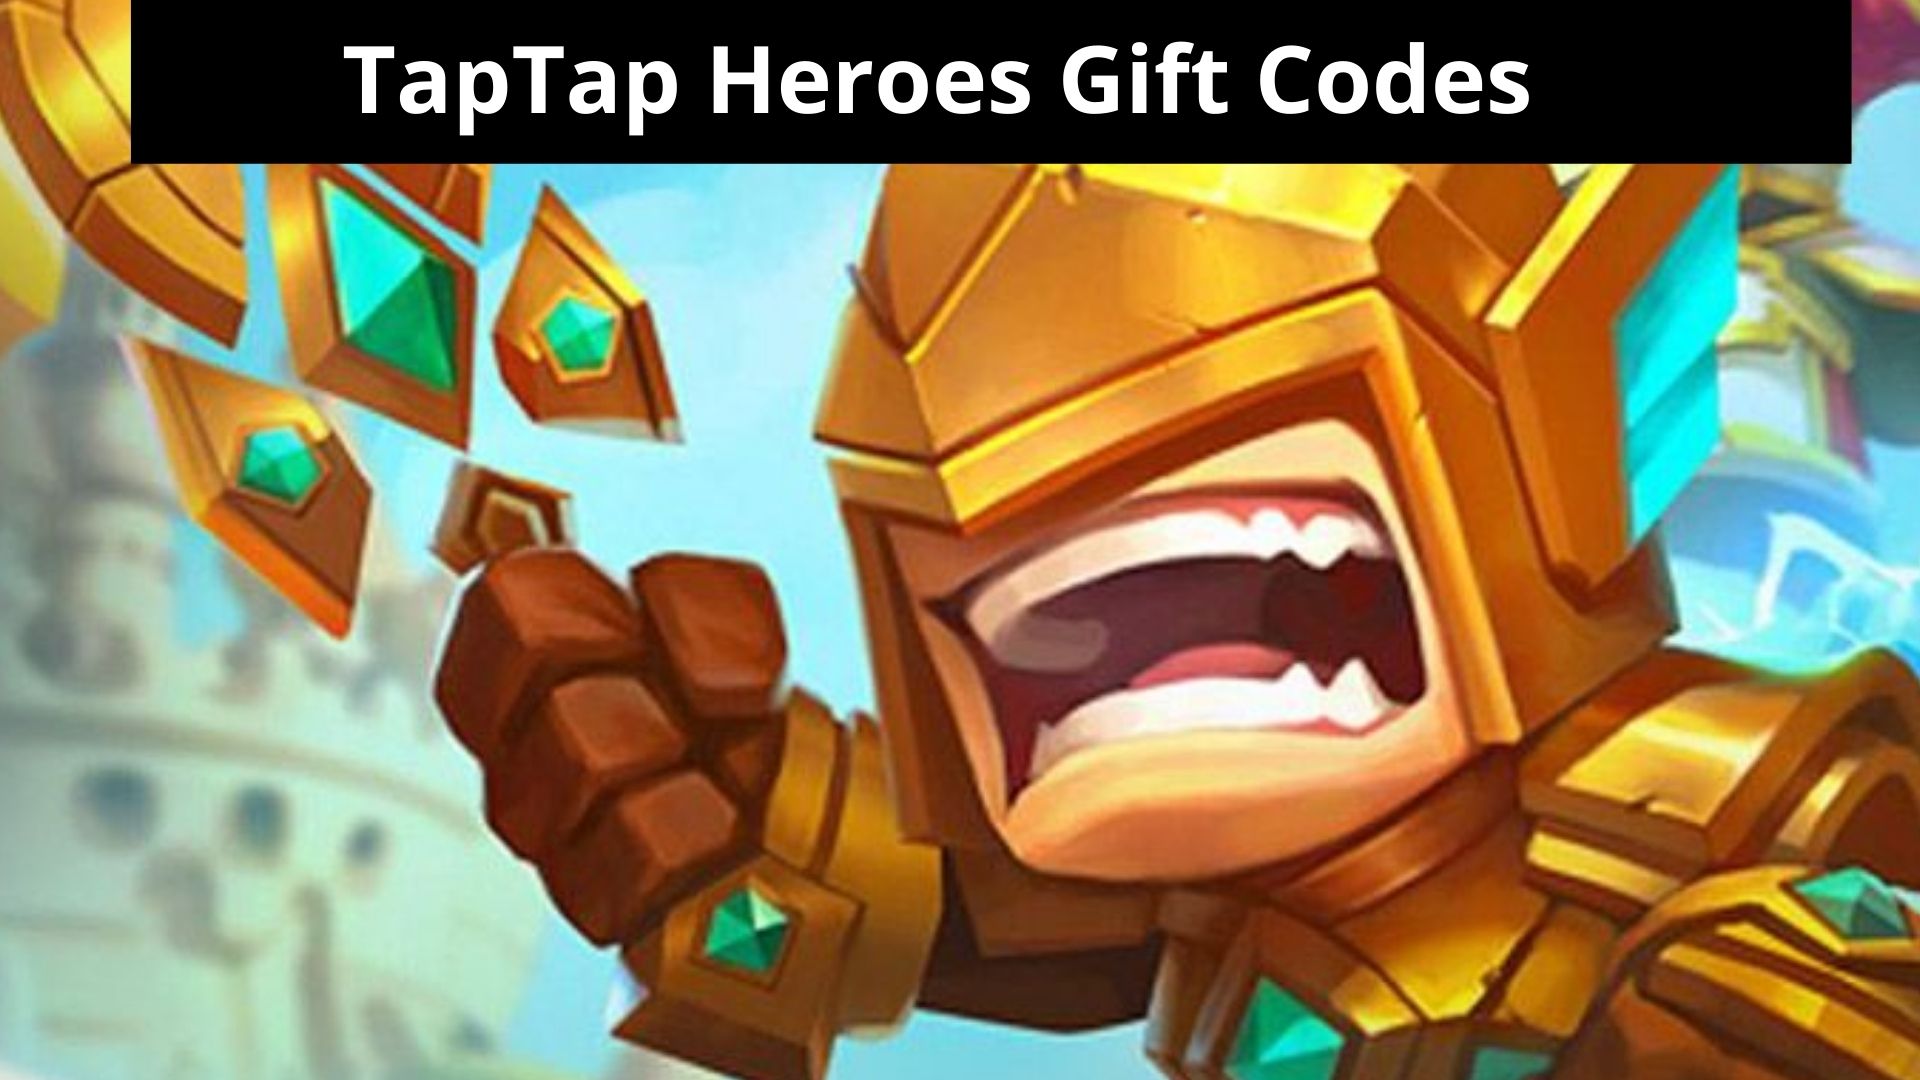 1. Taptap Heroes Gift Code List - Updated Daily - wide 1